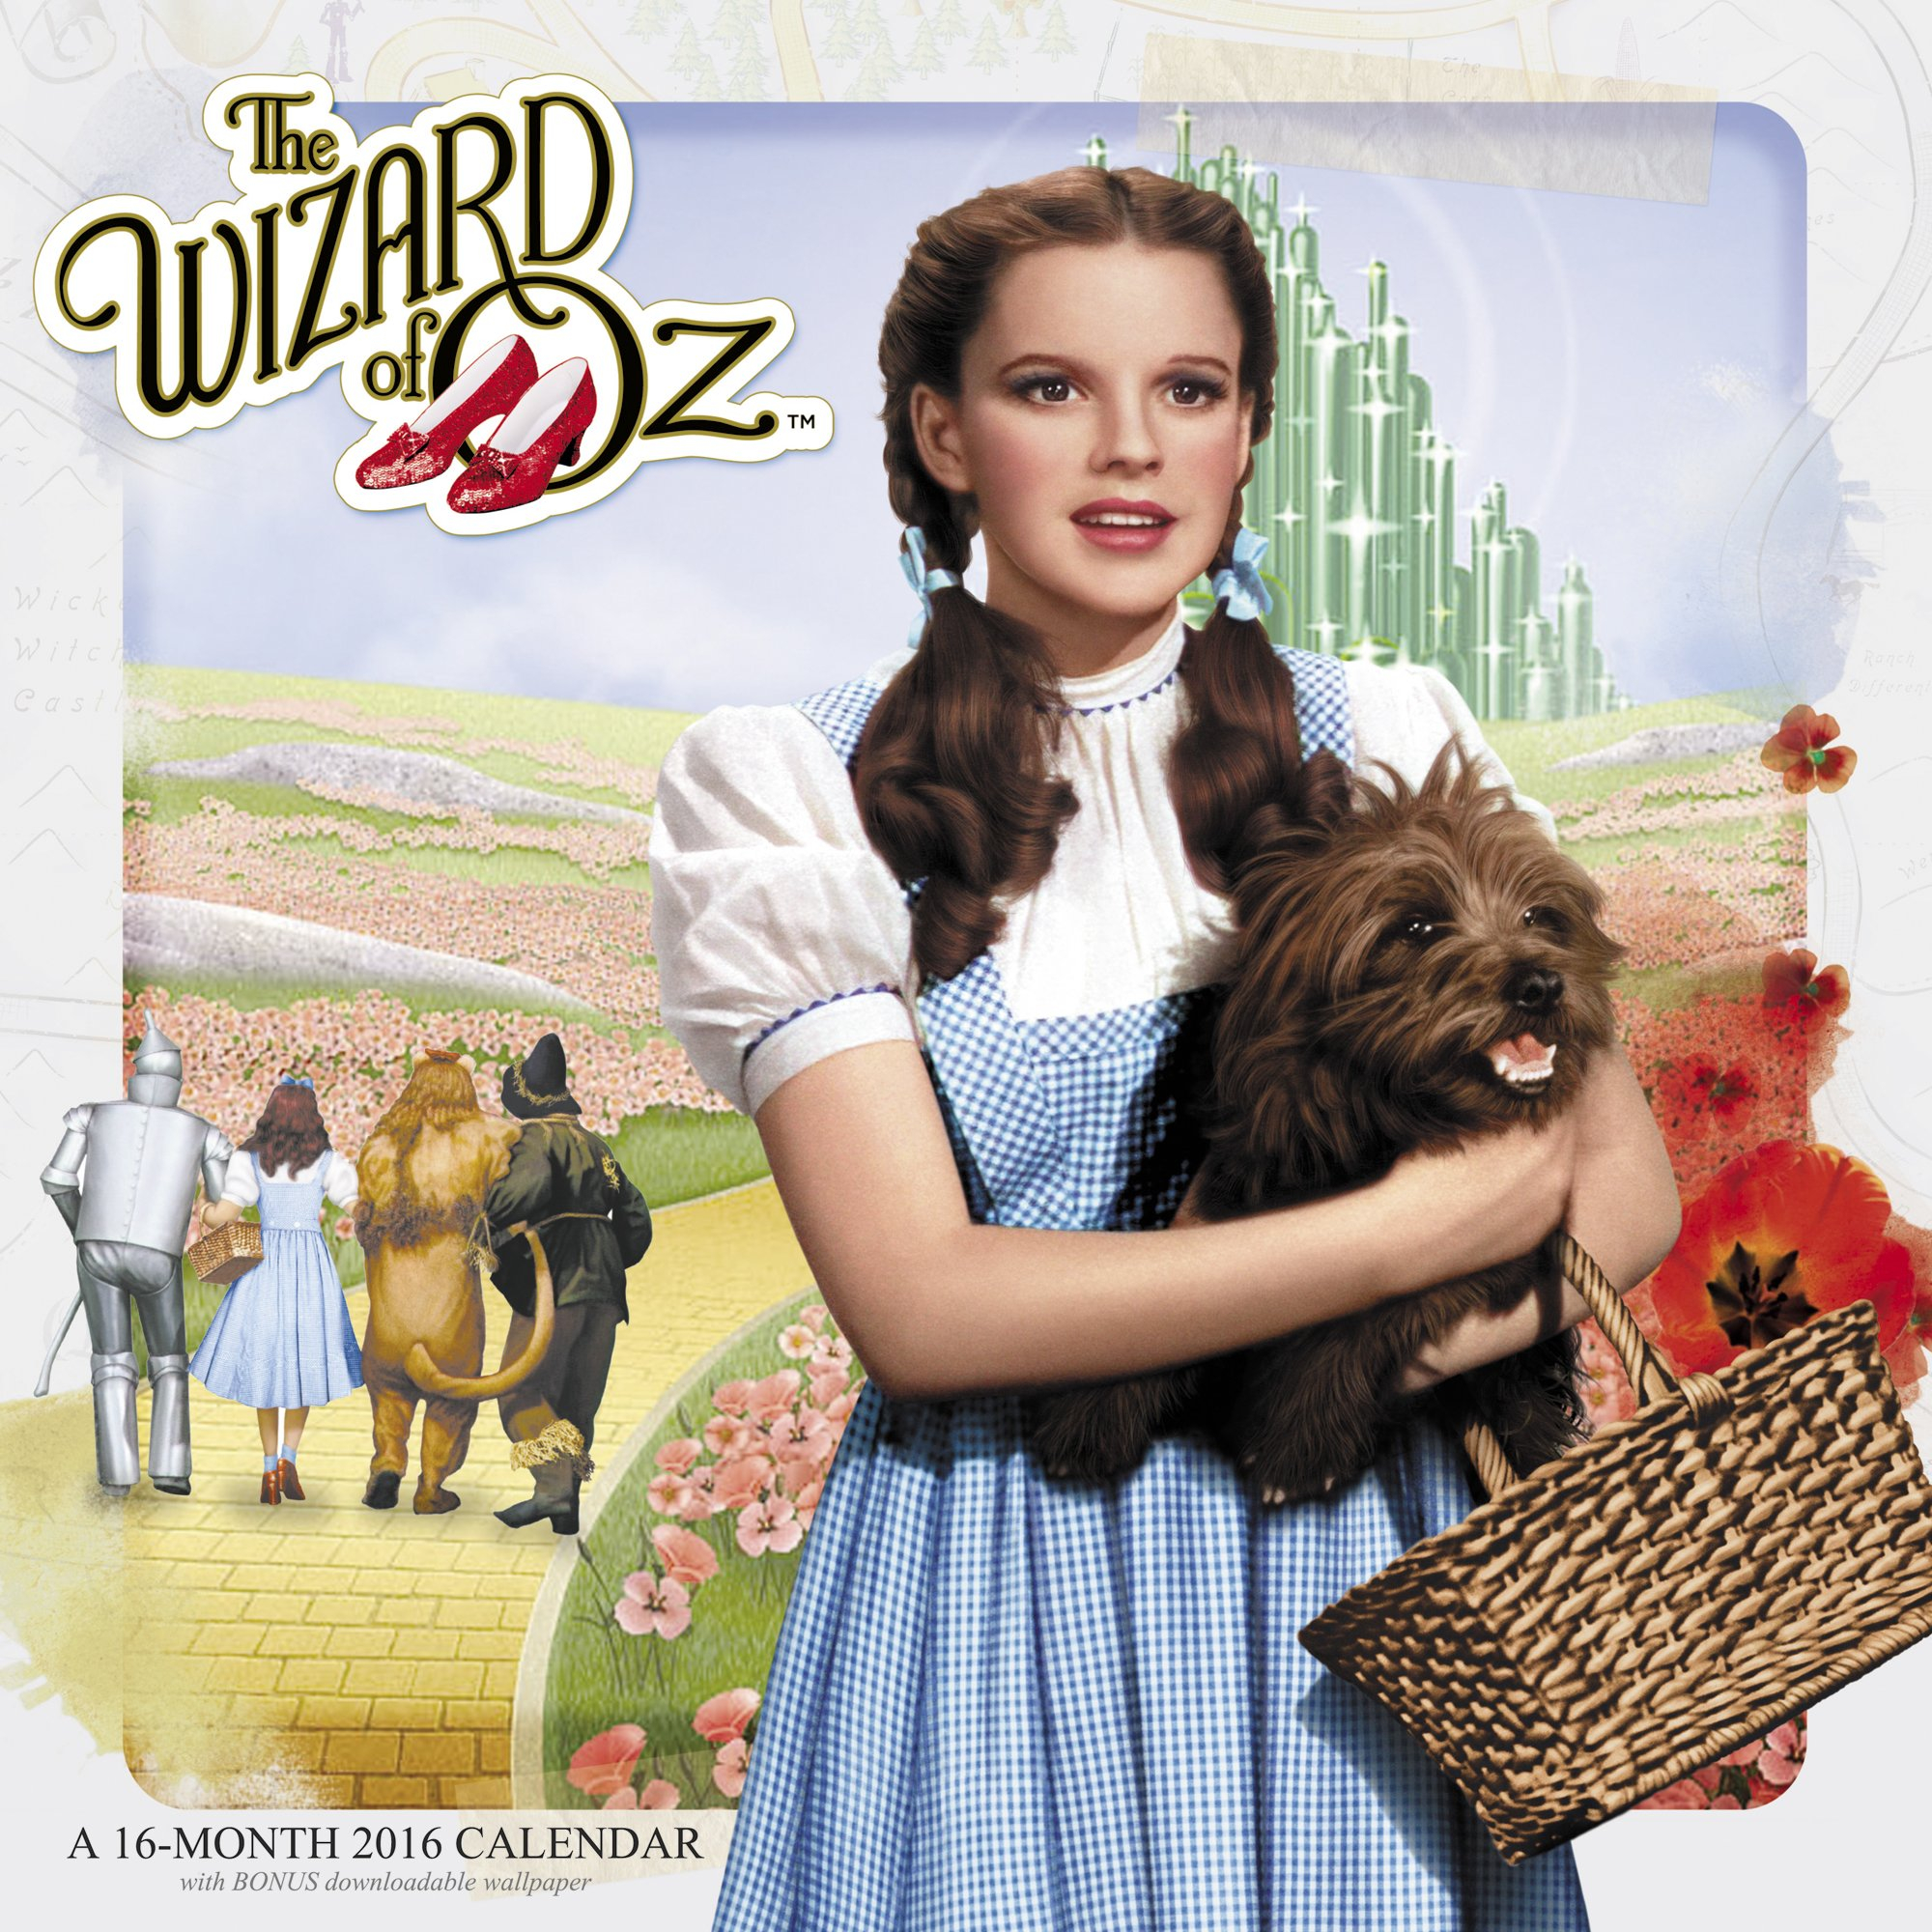 2000x2000 The Wizard of Oz 2016 Calendar: Free Downloadable Wallpaper Included : ACCO Brands: : Books